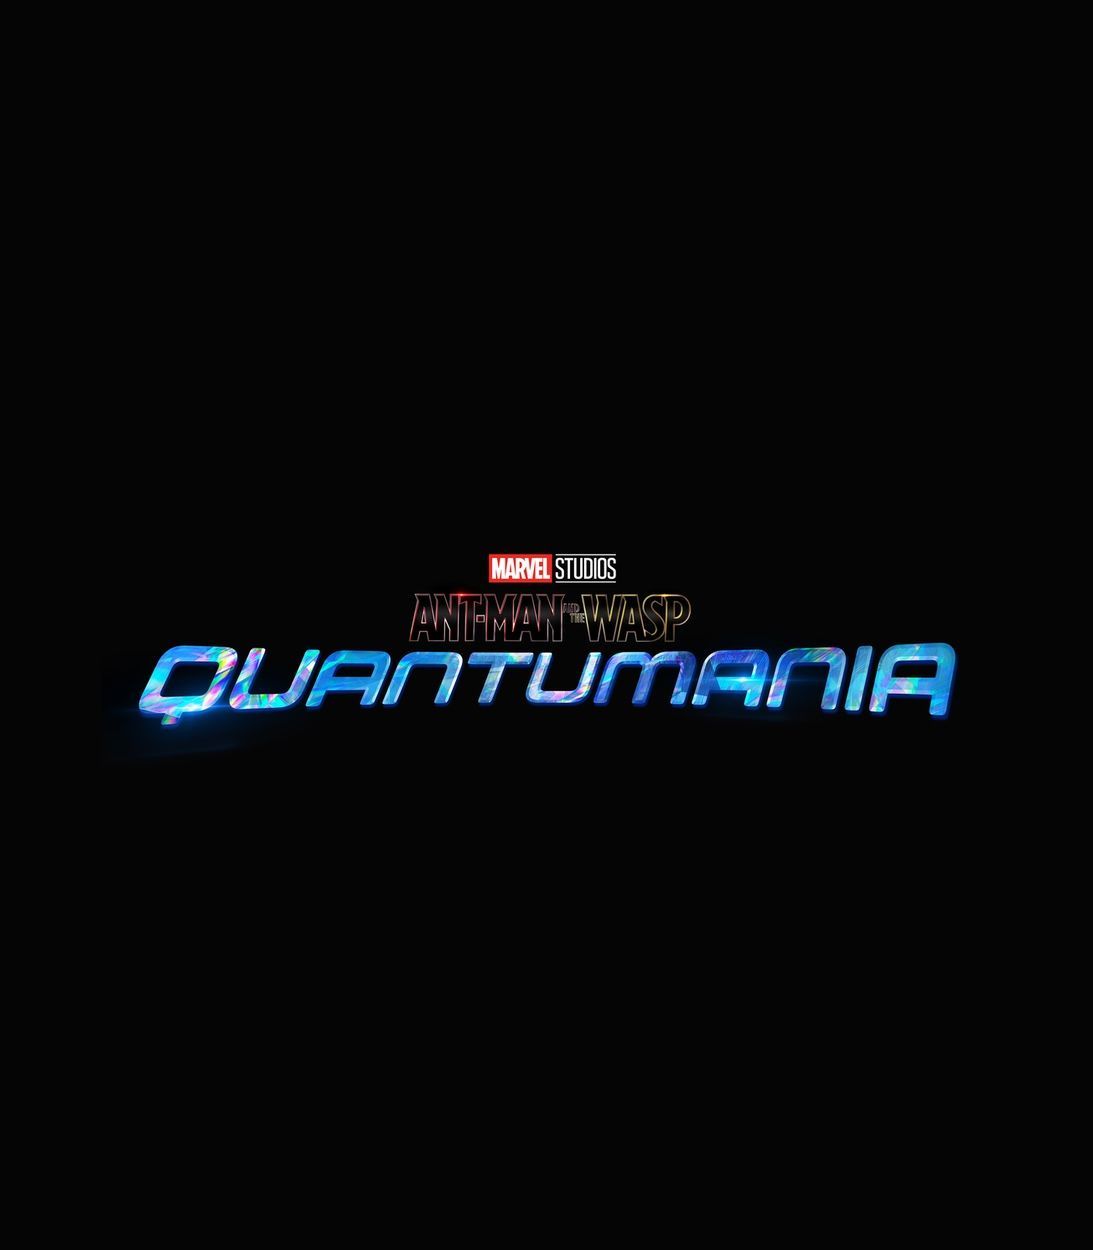 ant-man-and-the-wasp-quantumania-movie-logo-1.jpg